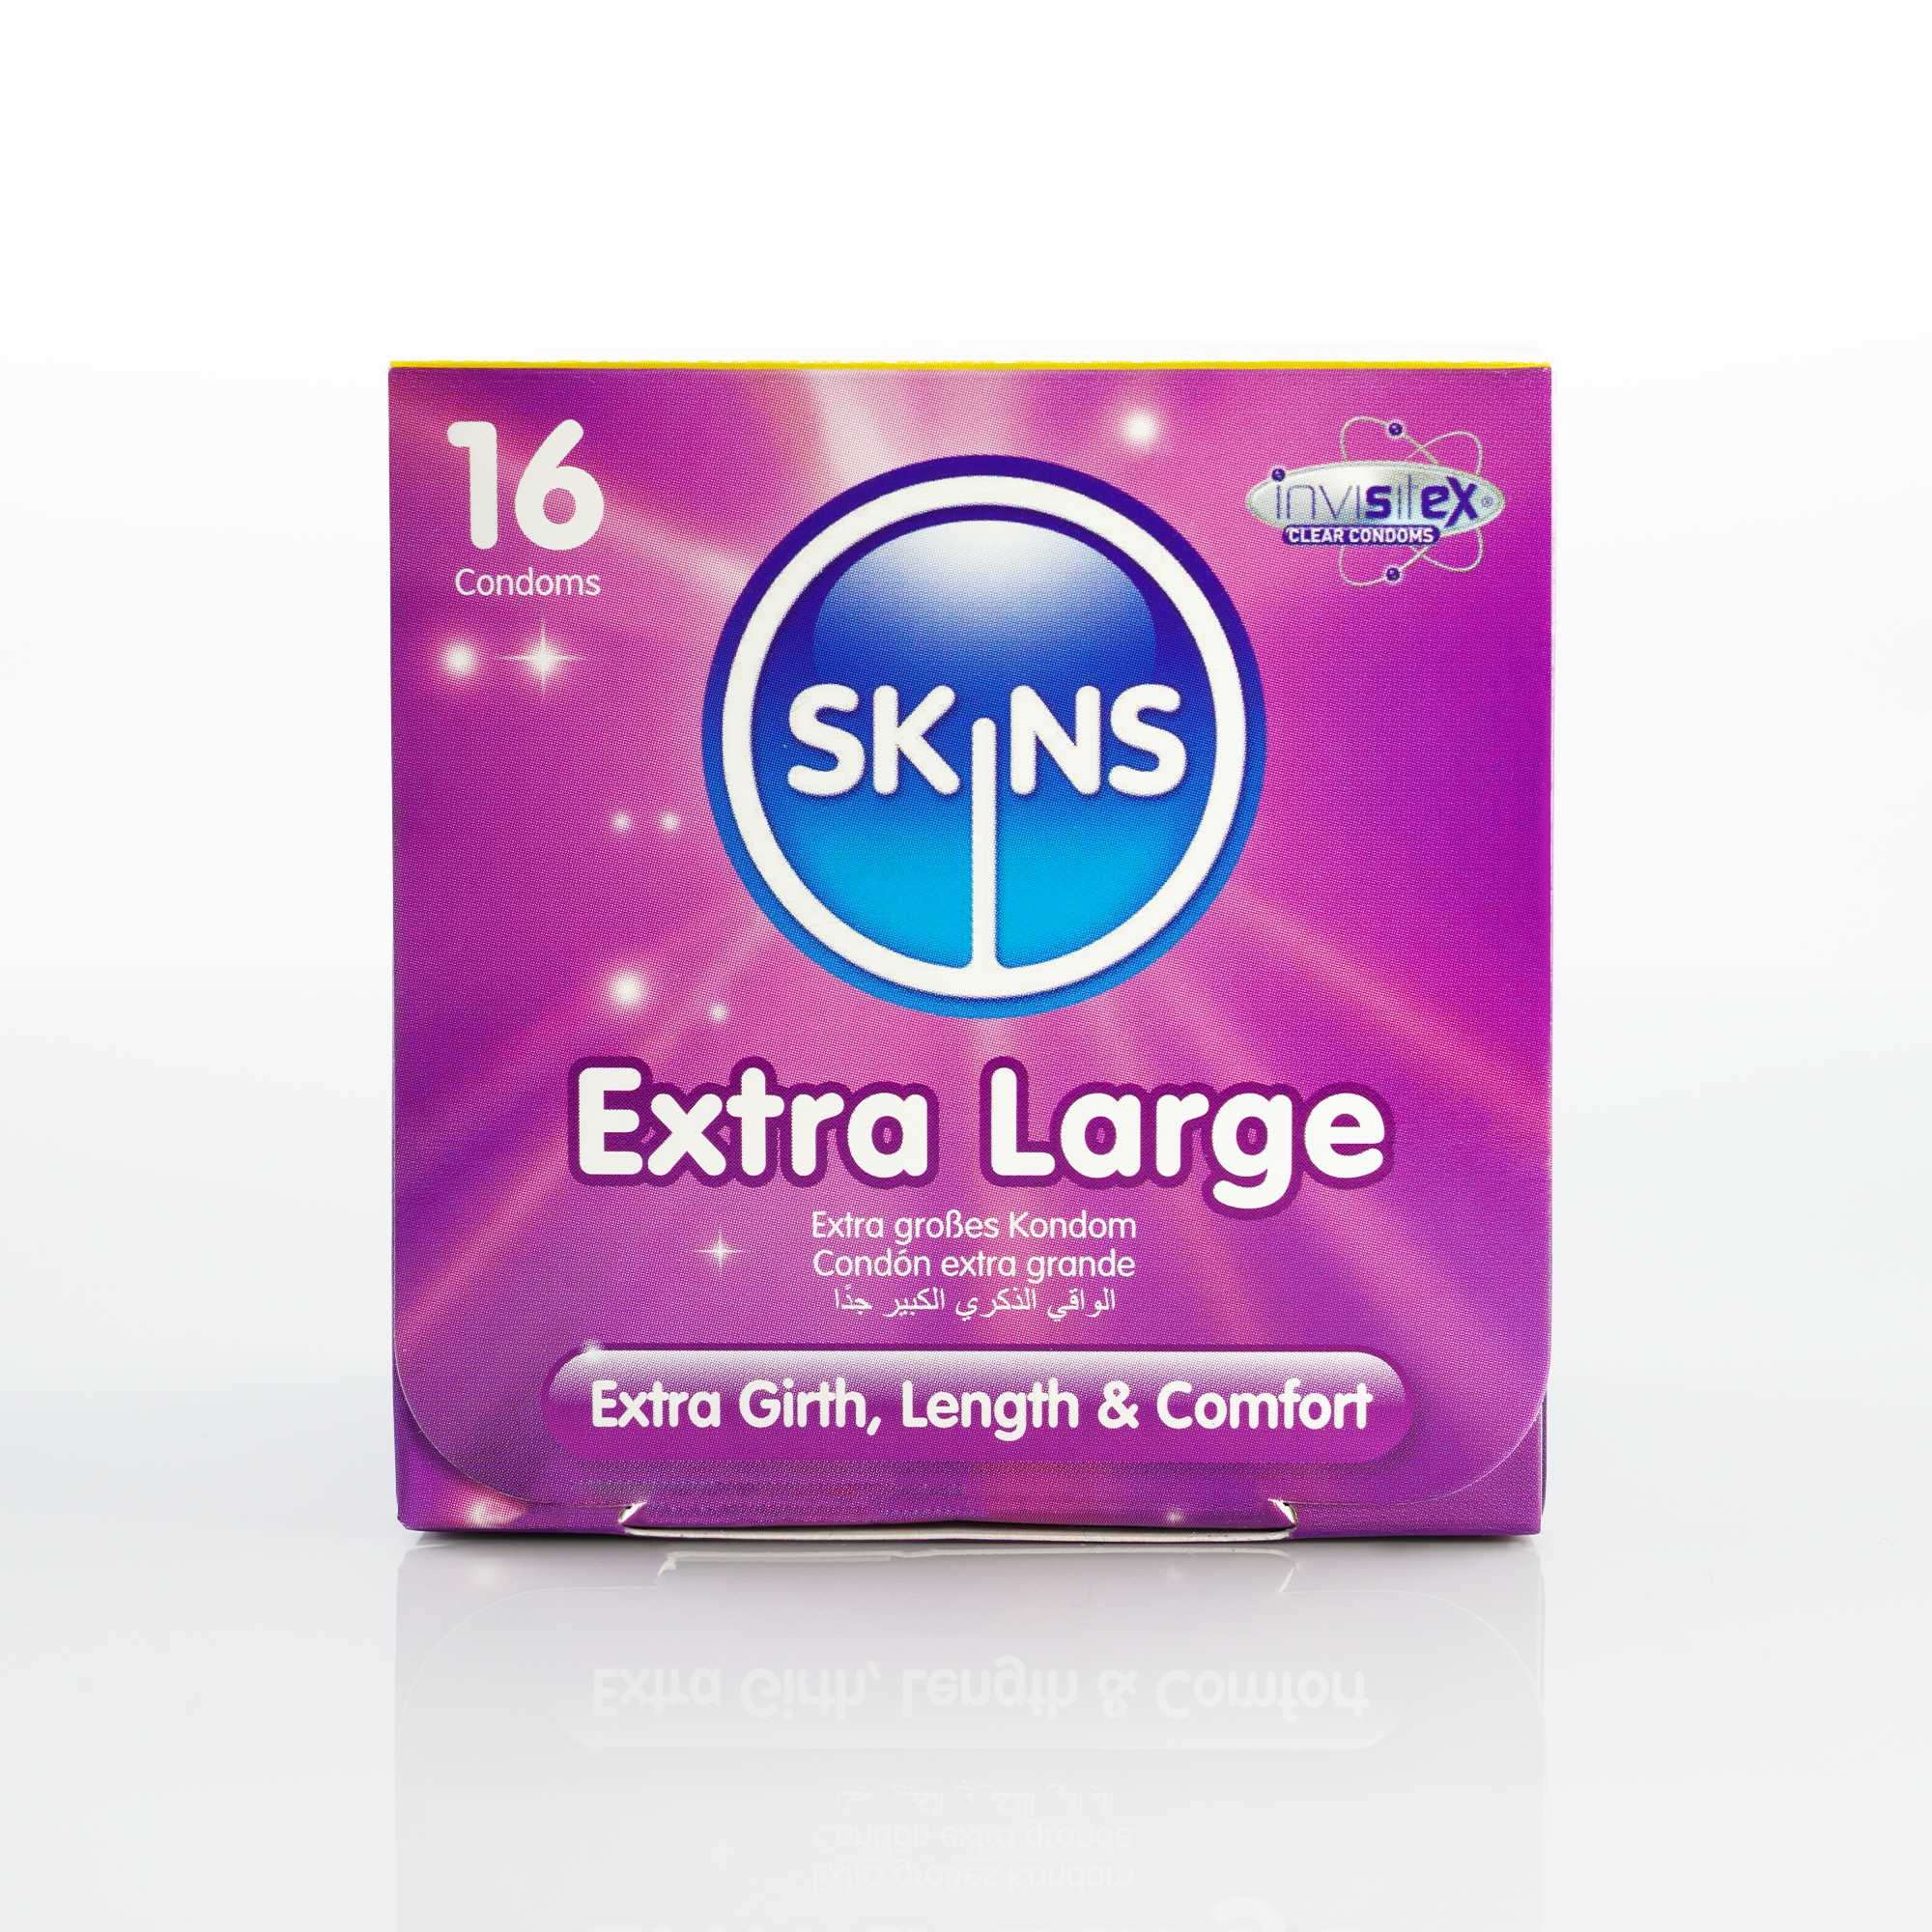 Skins Extra Large Condom-16 pack